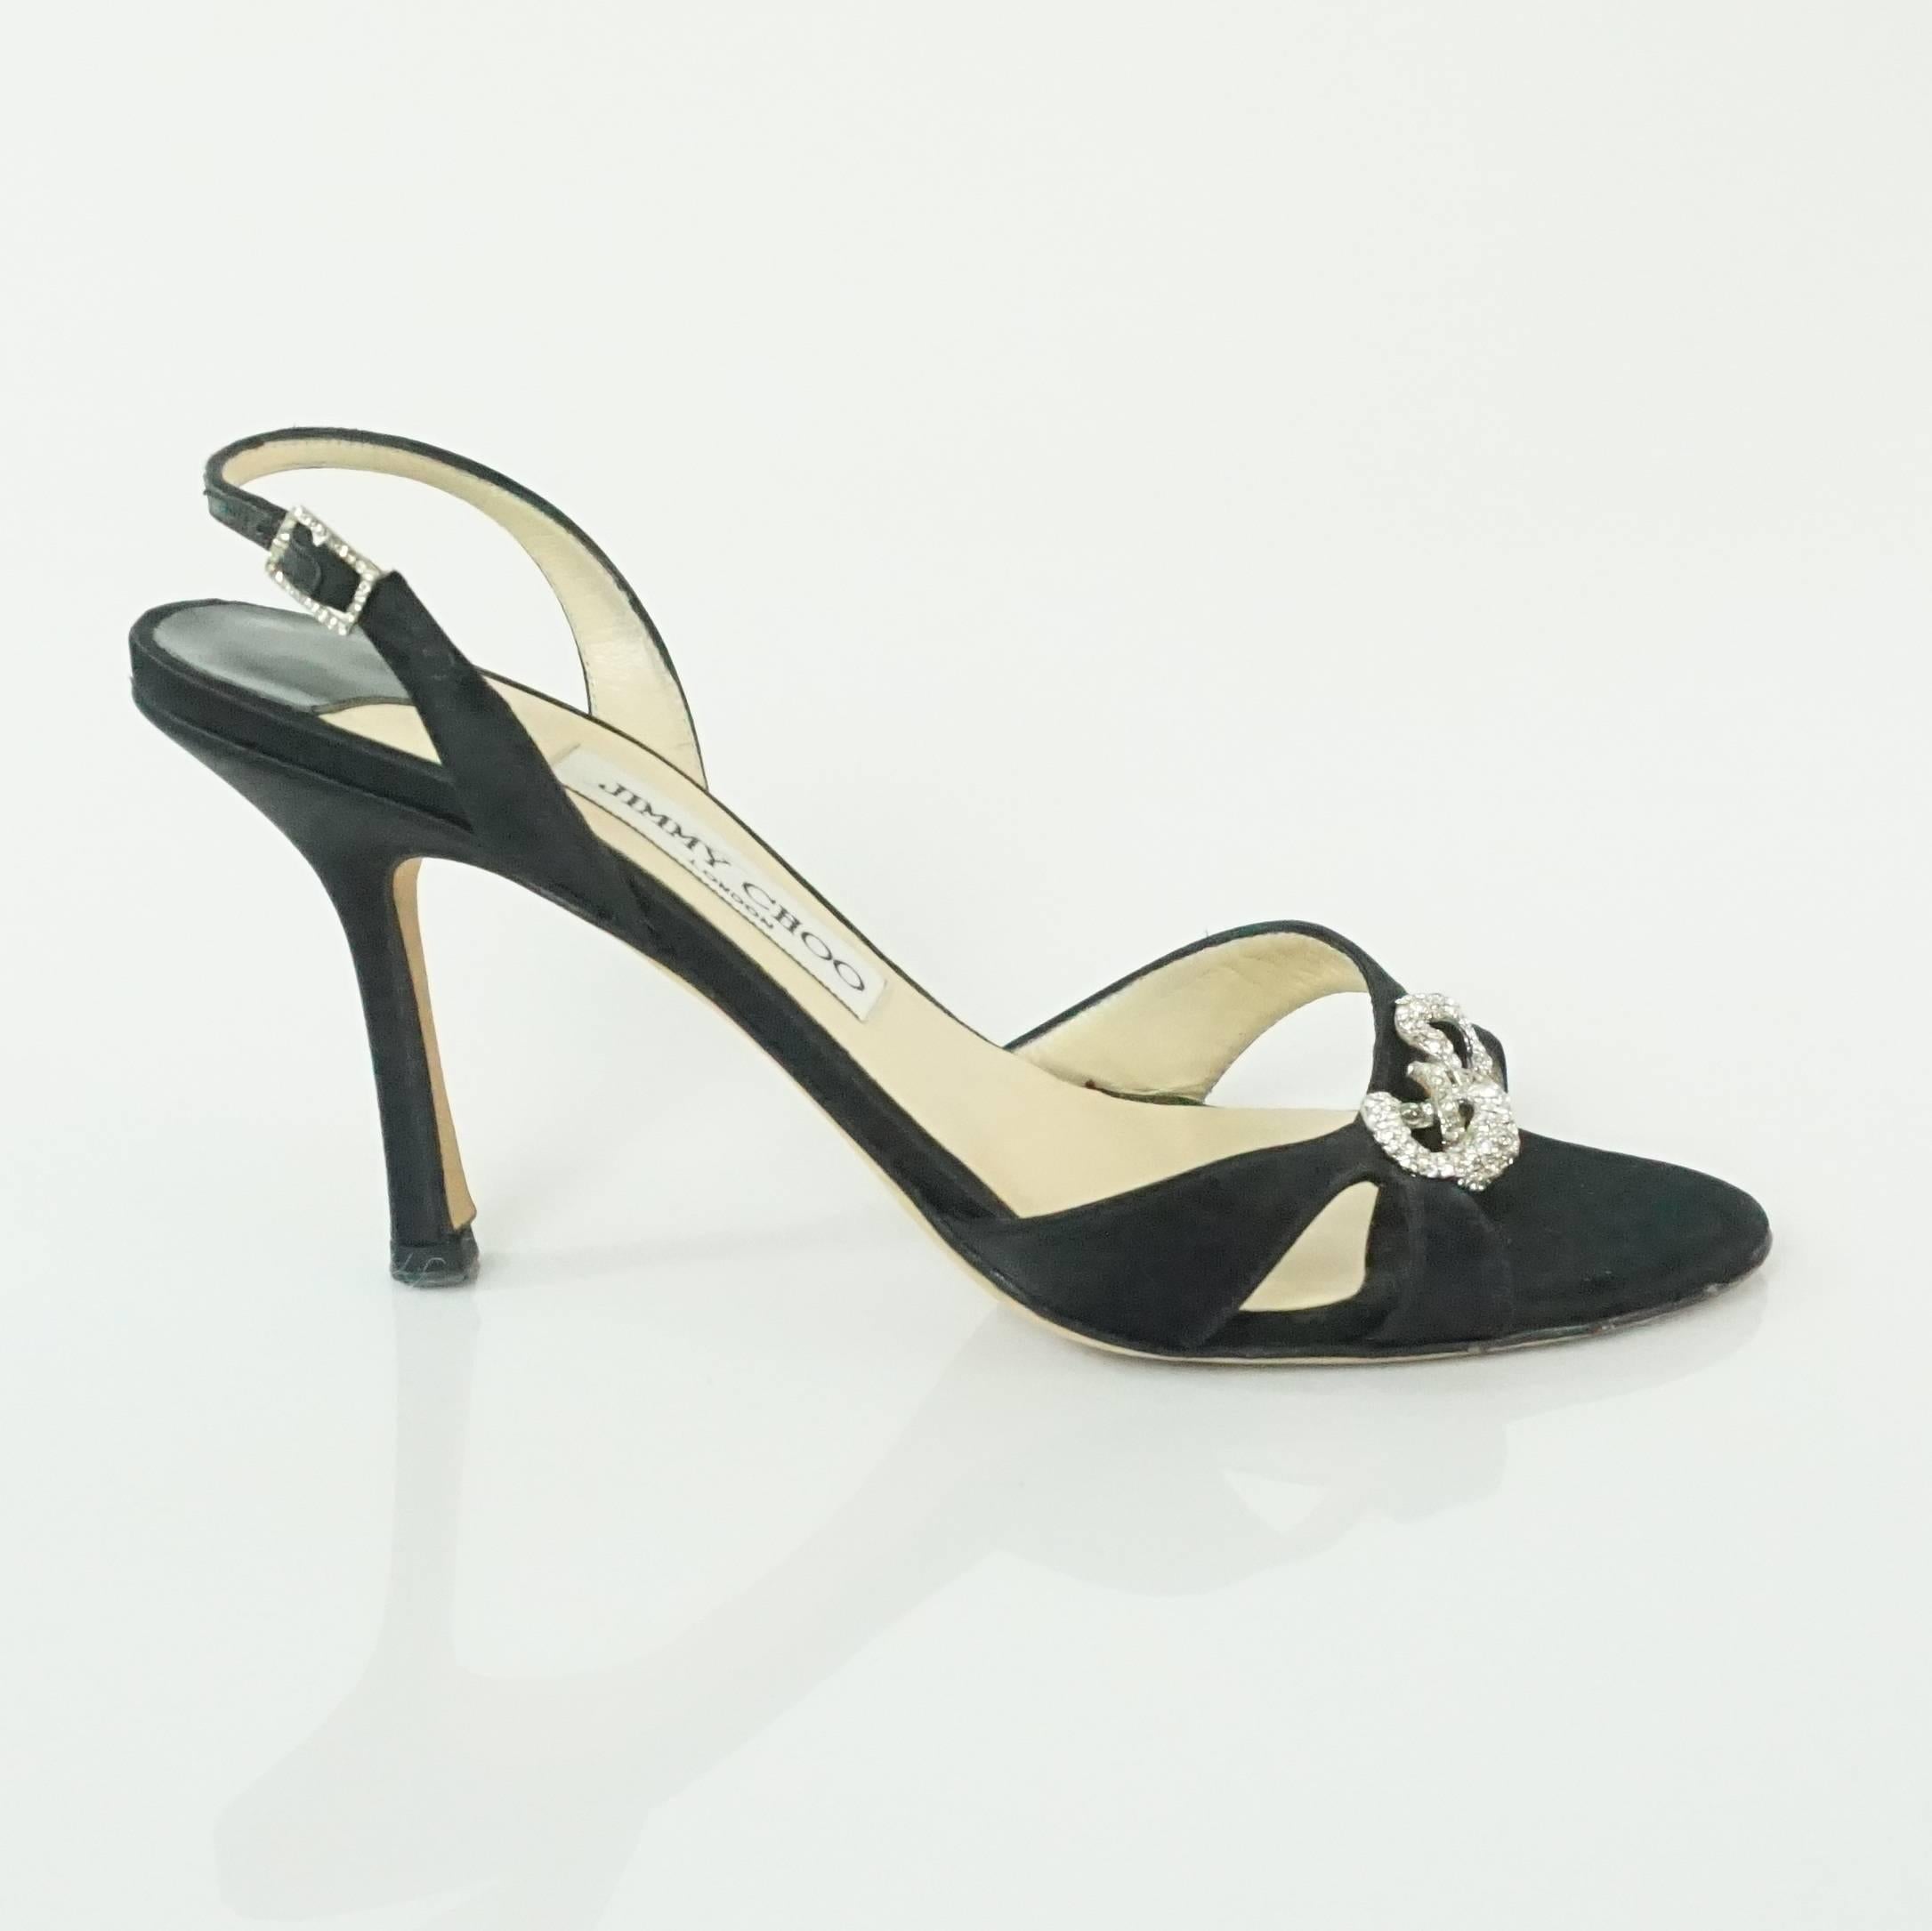 These Jimmy Choo black satin sandals have an open toe front with rhinestone links. They are in excellent condition with minimal bottom wear. The heels also come with a duster. 

Heel: 3.5